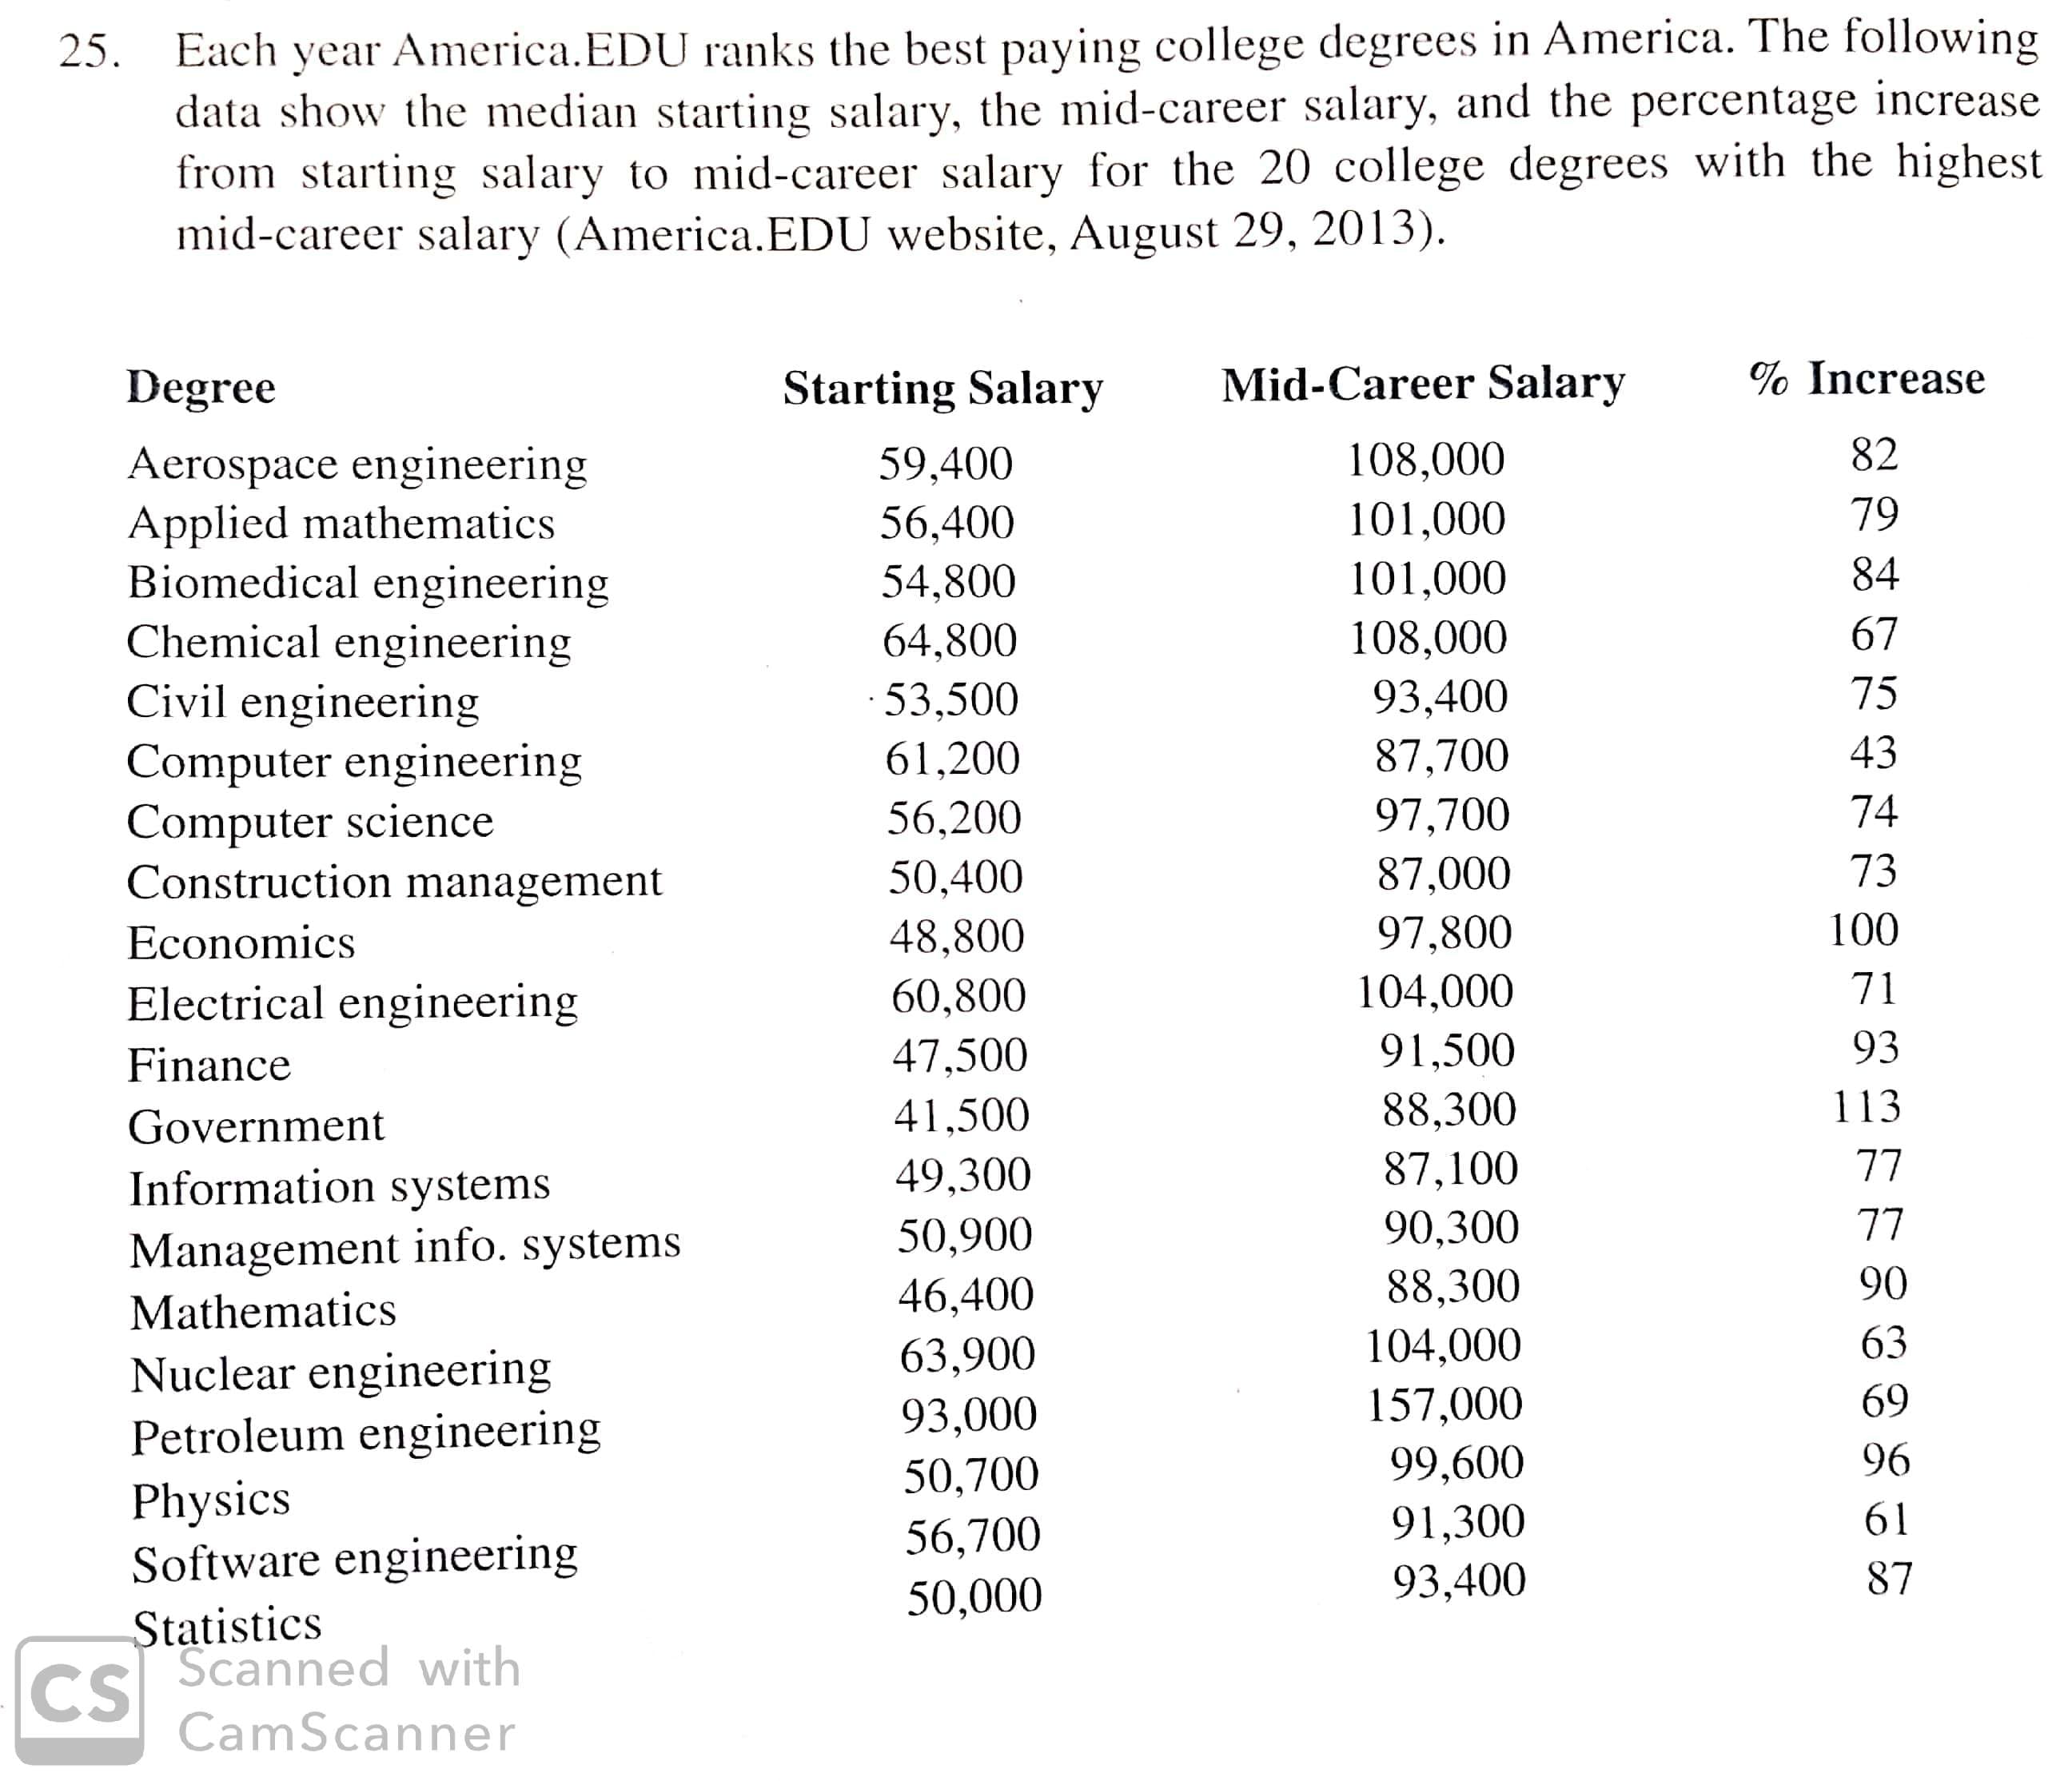 25. Each year America.EDU ranks the best paying college degrees in America. The following
data show the median starting salary, the mid-career salary, and the percentage increase
from starting salary to mid-career salary for the 20 college degrees with the highest
mid-career salary (America.EDU website, August 29, 2013)
% Increase
Mid-Career Salary
Degree
Starting Salary
82
108,000
Aerospace engineering
Applied mathematics
Biomedical engineering
Chemical engineering
Civil engineering
Computer engineering
Computer science
Construction management
59,400
79
101,000
56,400
84
101,000
54,800
67
108,000
64,800
75
93,400
53,500
43
87,700
61,200
74
97,700
56,200
73
87,000
97,800
50,400
100
48,800
Economics
71
104,000
60,800
Electrical engineering
93
91,500
47,500
Finance
113
88,300
41,500
Government
77
87,100
49,300
Information systems
77
90,300
50,900
46,400
63,900
93,000
Management info. systems
90
88,300
Mathematics
63
104,000
Nuclear engineering
Petroleum engineering
Physics
Software engineering
69
157,000
96
99,600
91,300
50,700
61
56,700
87
93,400
50,000
Statistics
cs Scanned with
CamScanner
